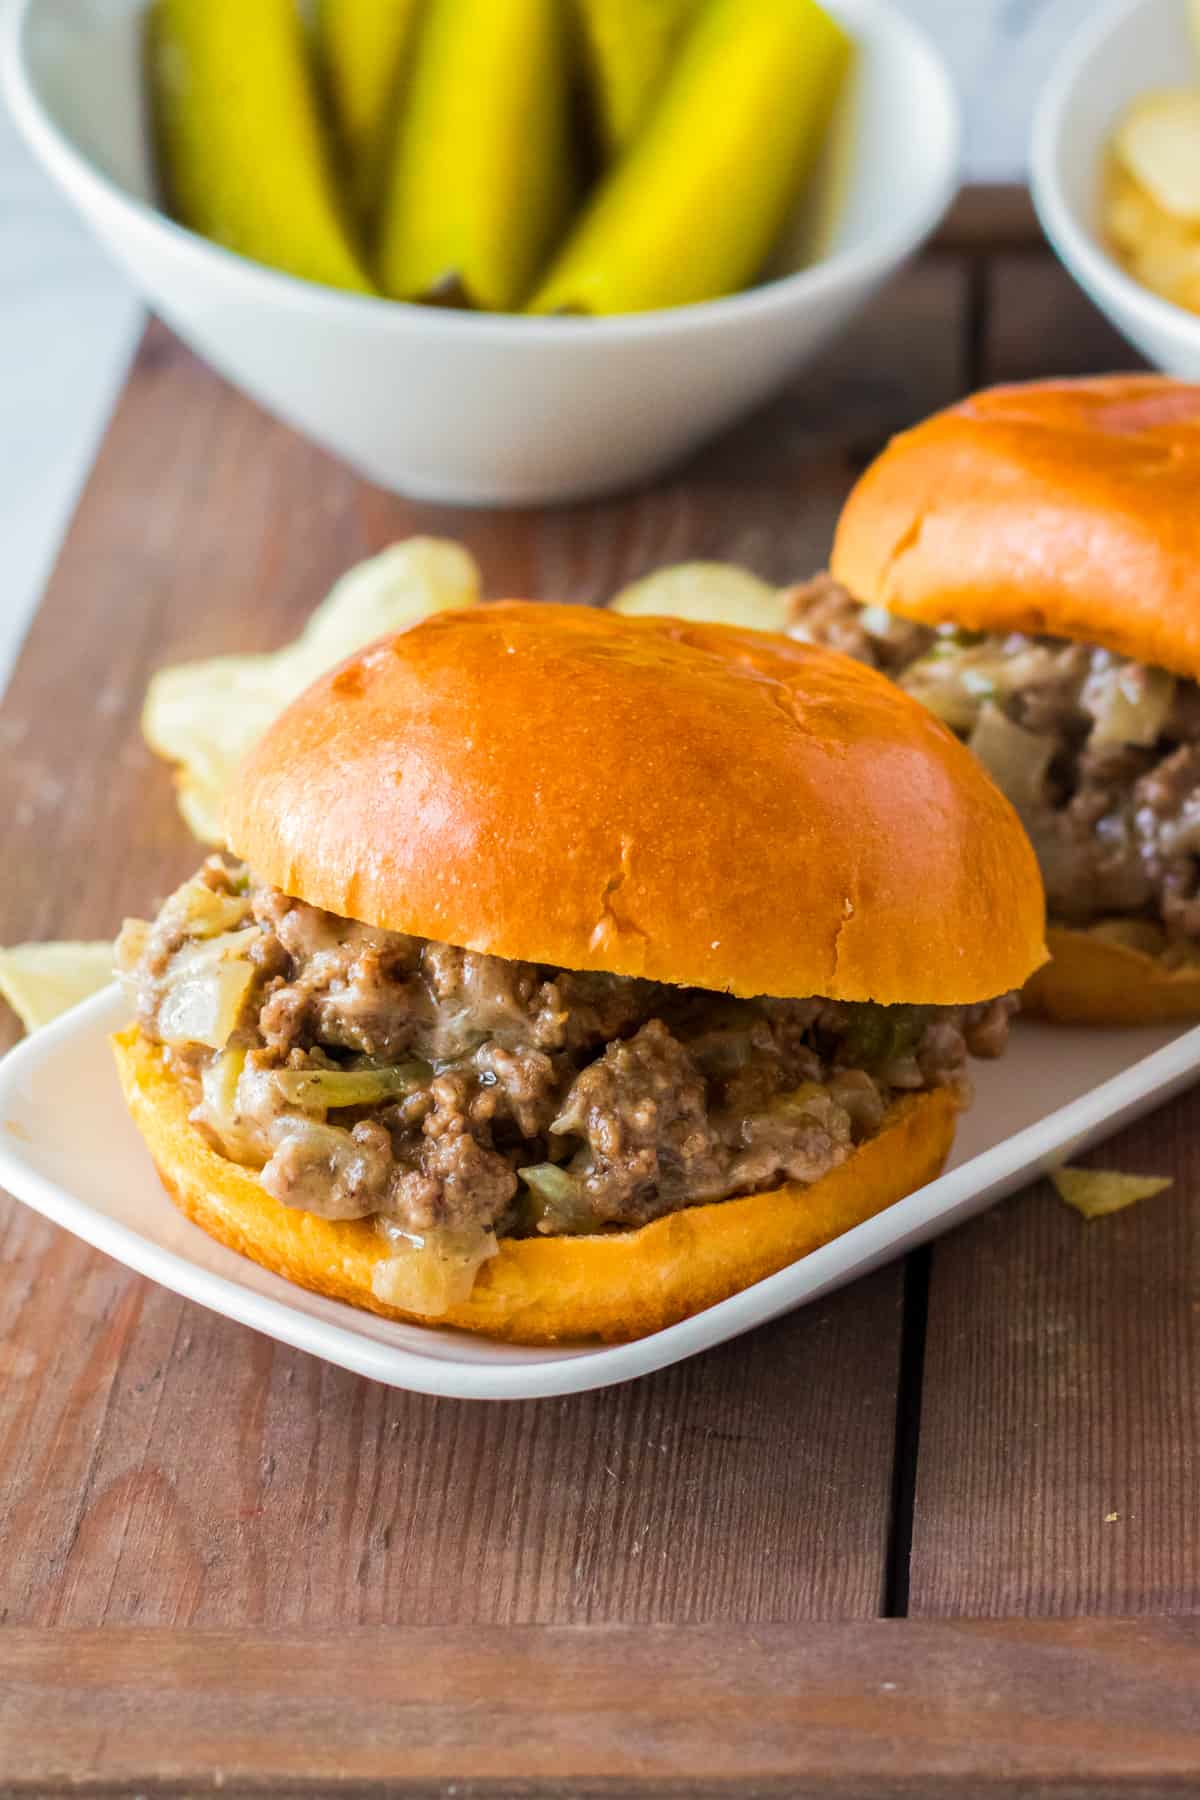 Sloppy joes with cheese, peppers, and onions on soft buns served with pickles and chips.